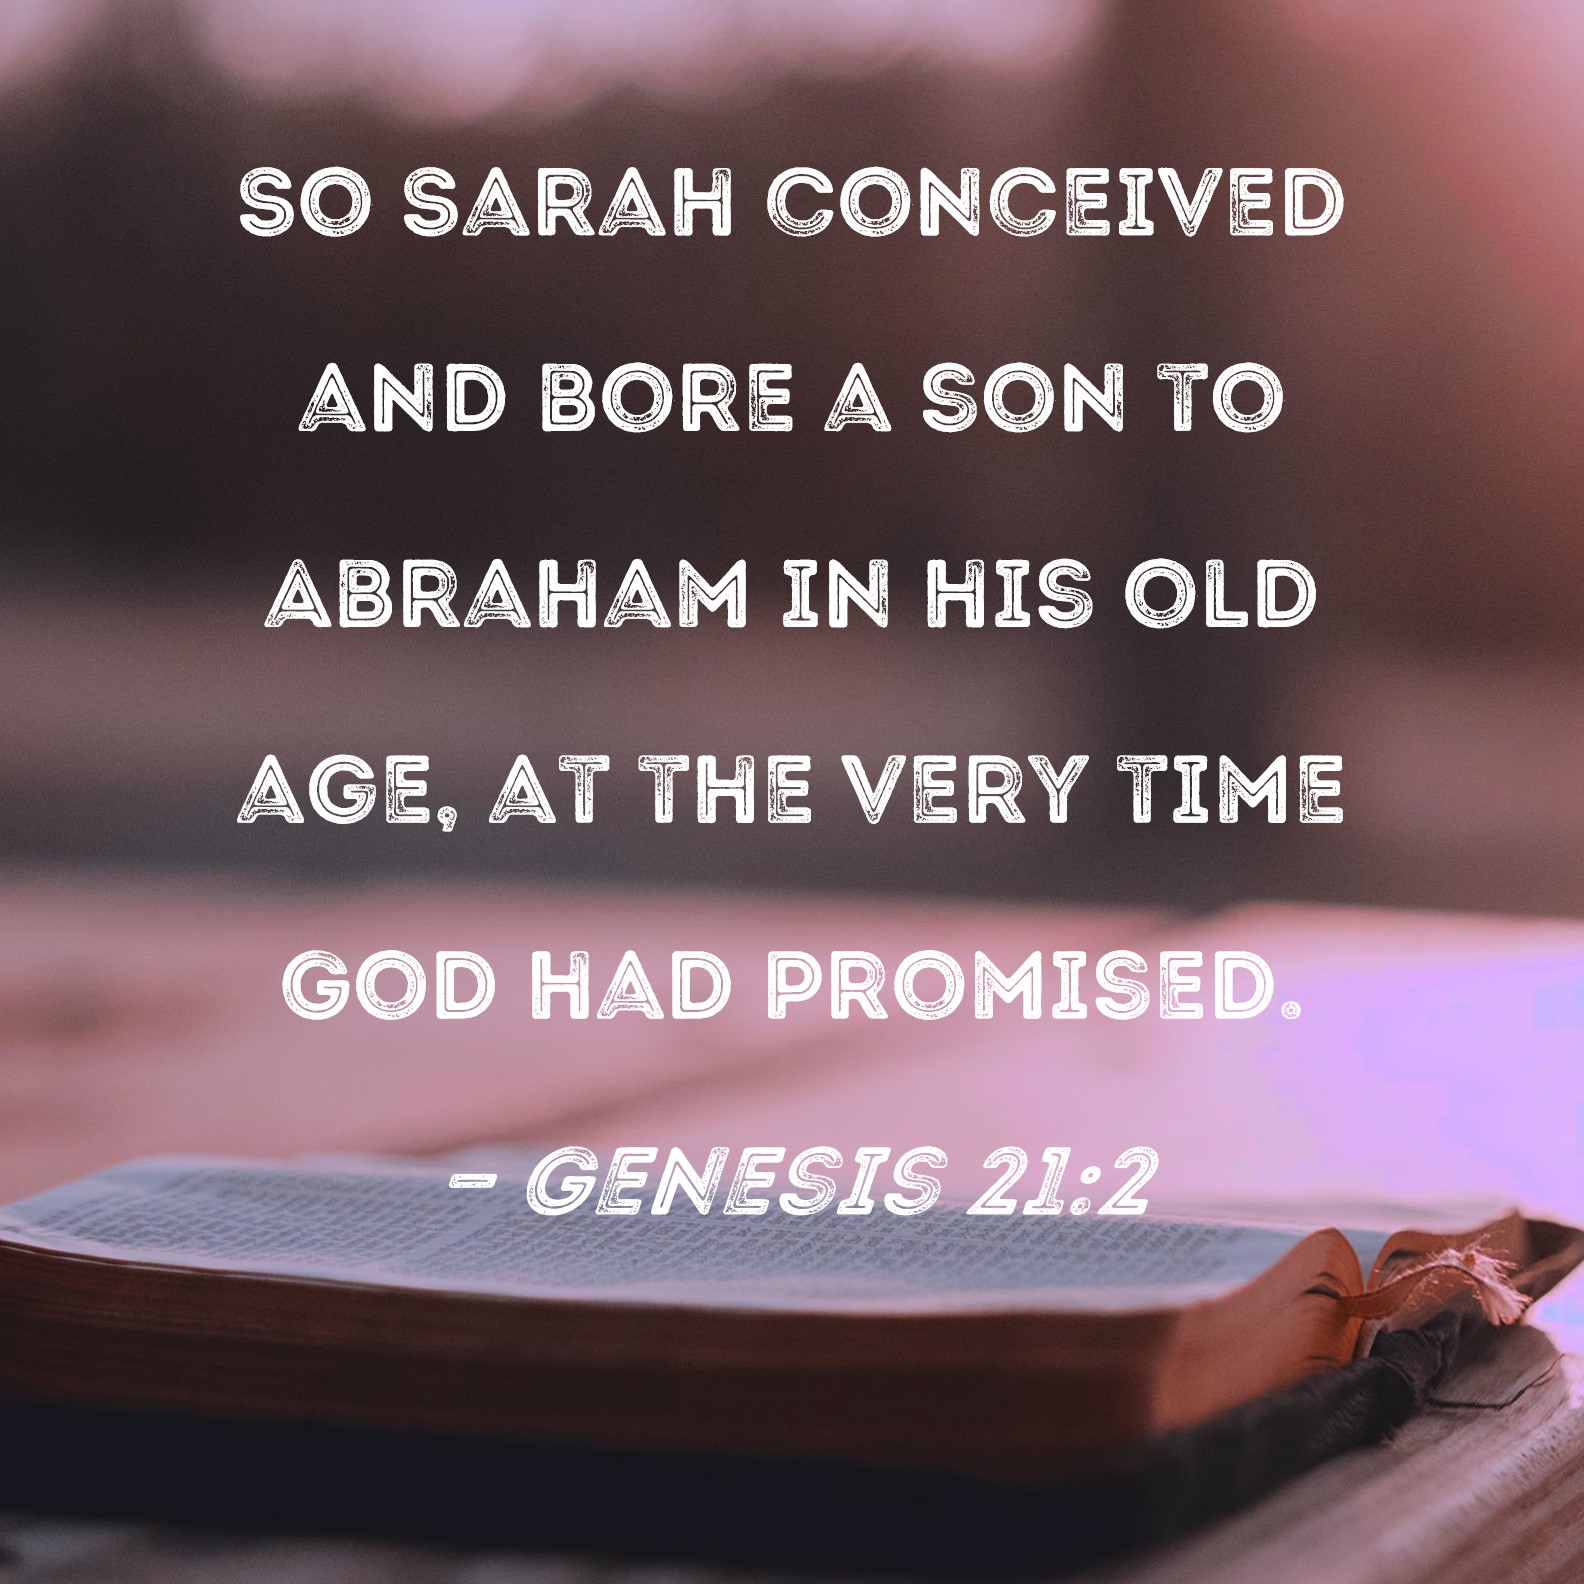 Genesis 21:2 So Sarah conceived and bore a son to Abraham in his old age,  at the very time God had promised.